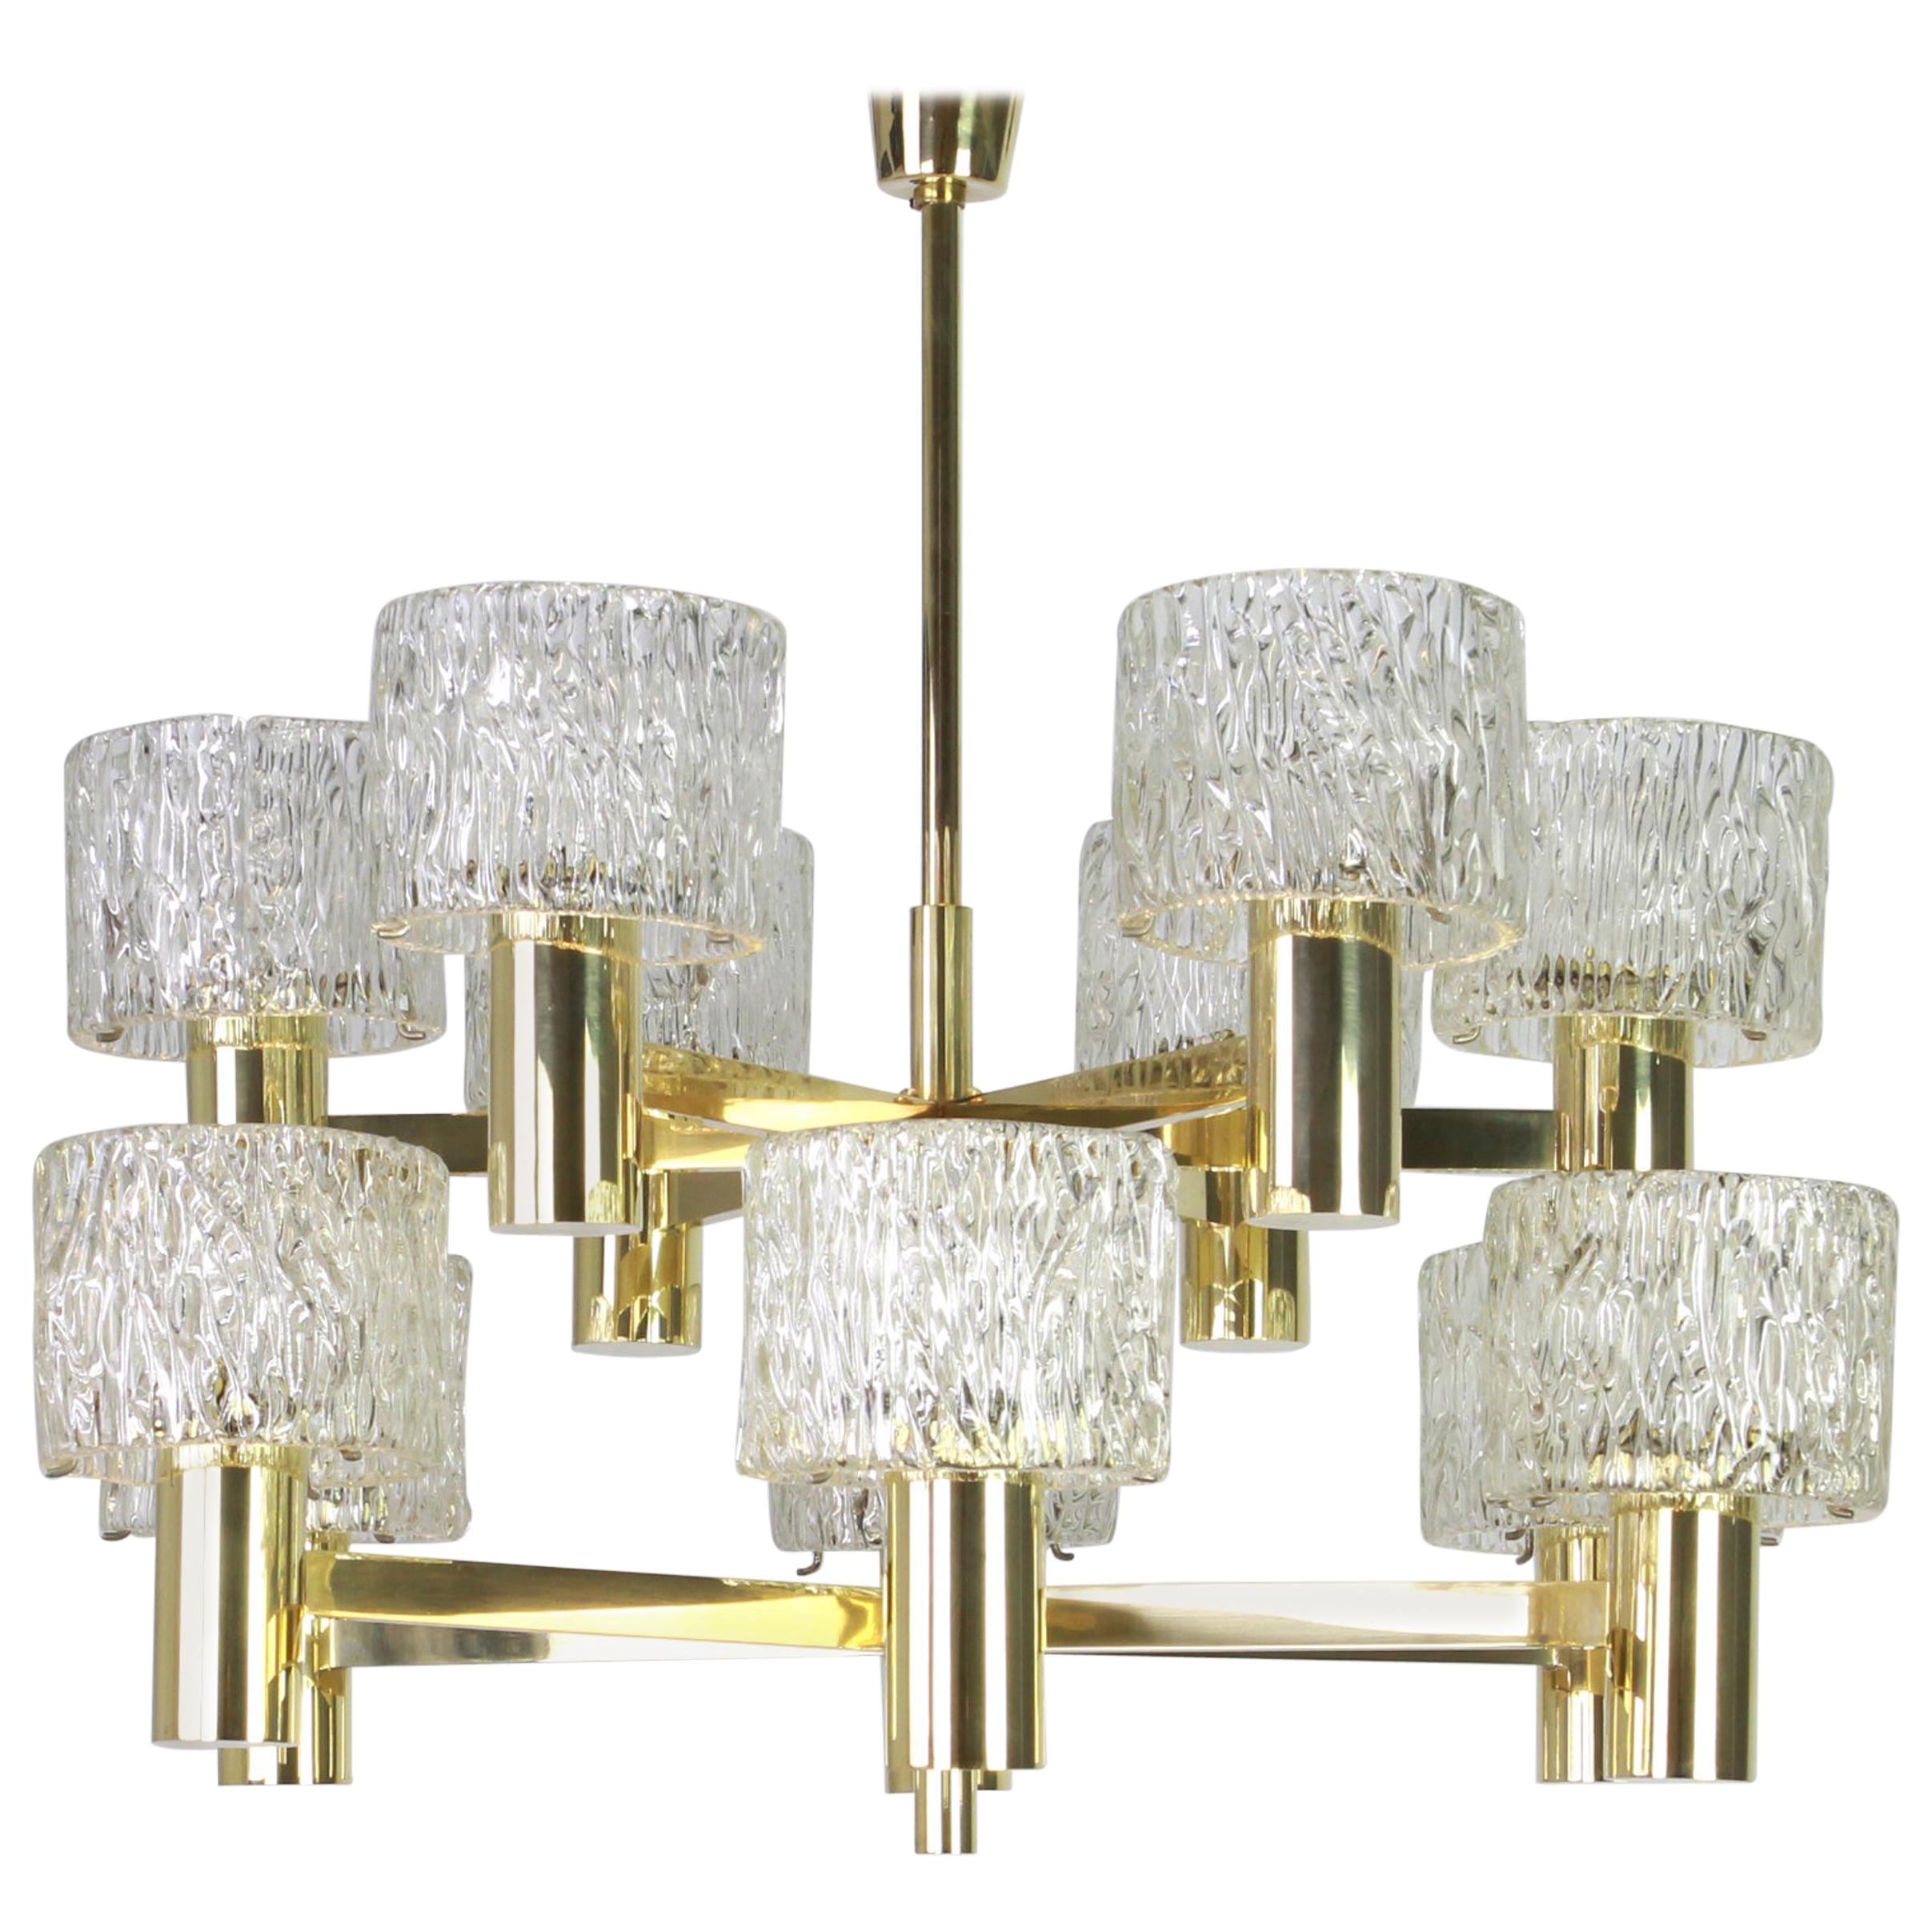 Large Stunning Brass Murano Glass Chandelier by Hillebrand, Germany, 1970s